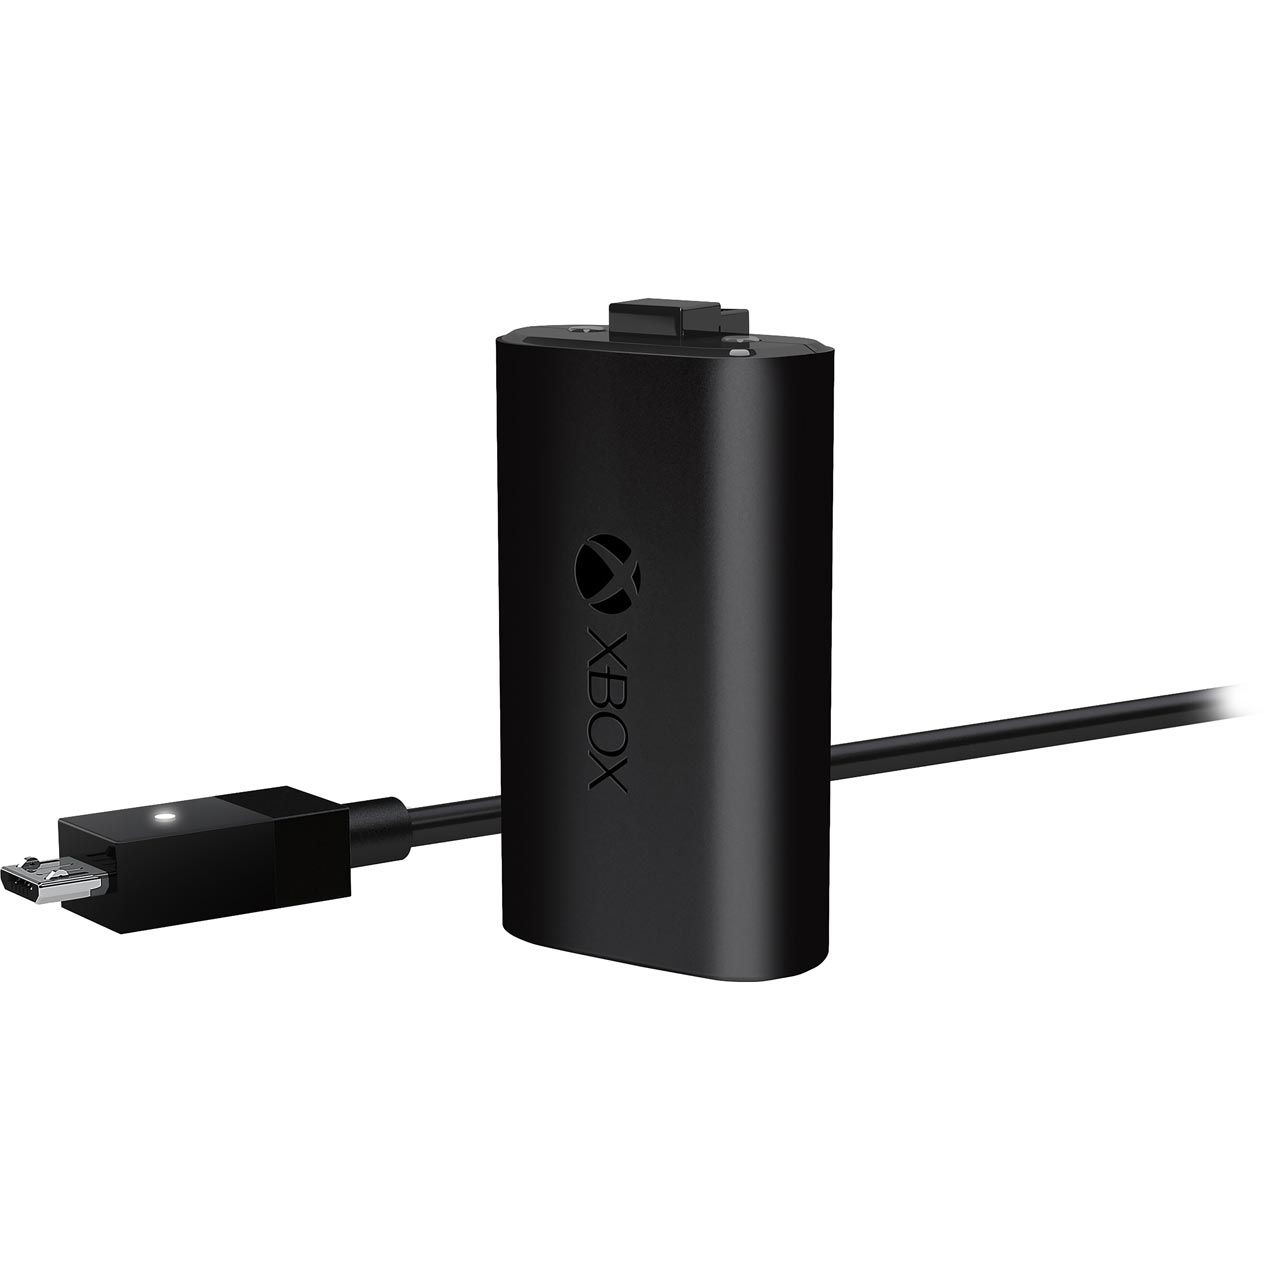 Xbox One Play And Charge Kit Review